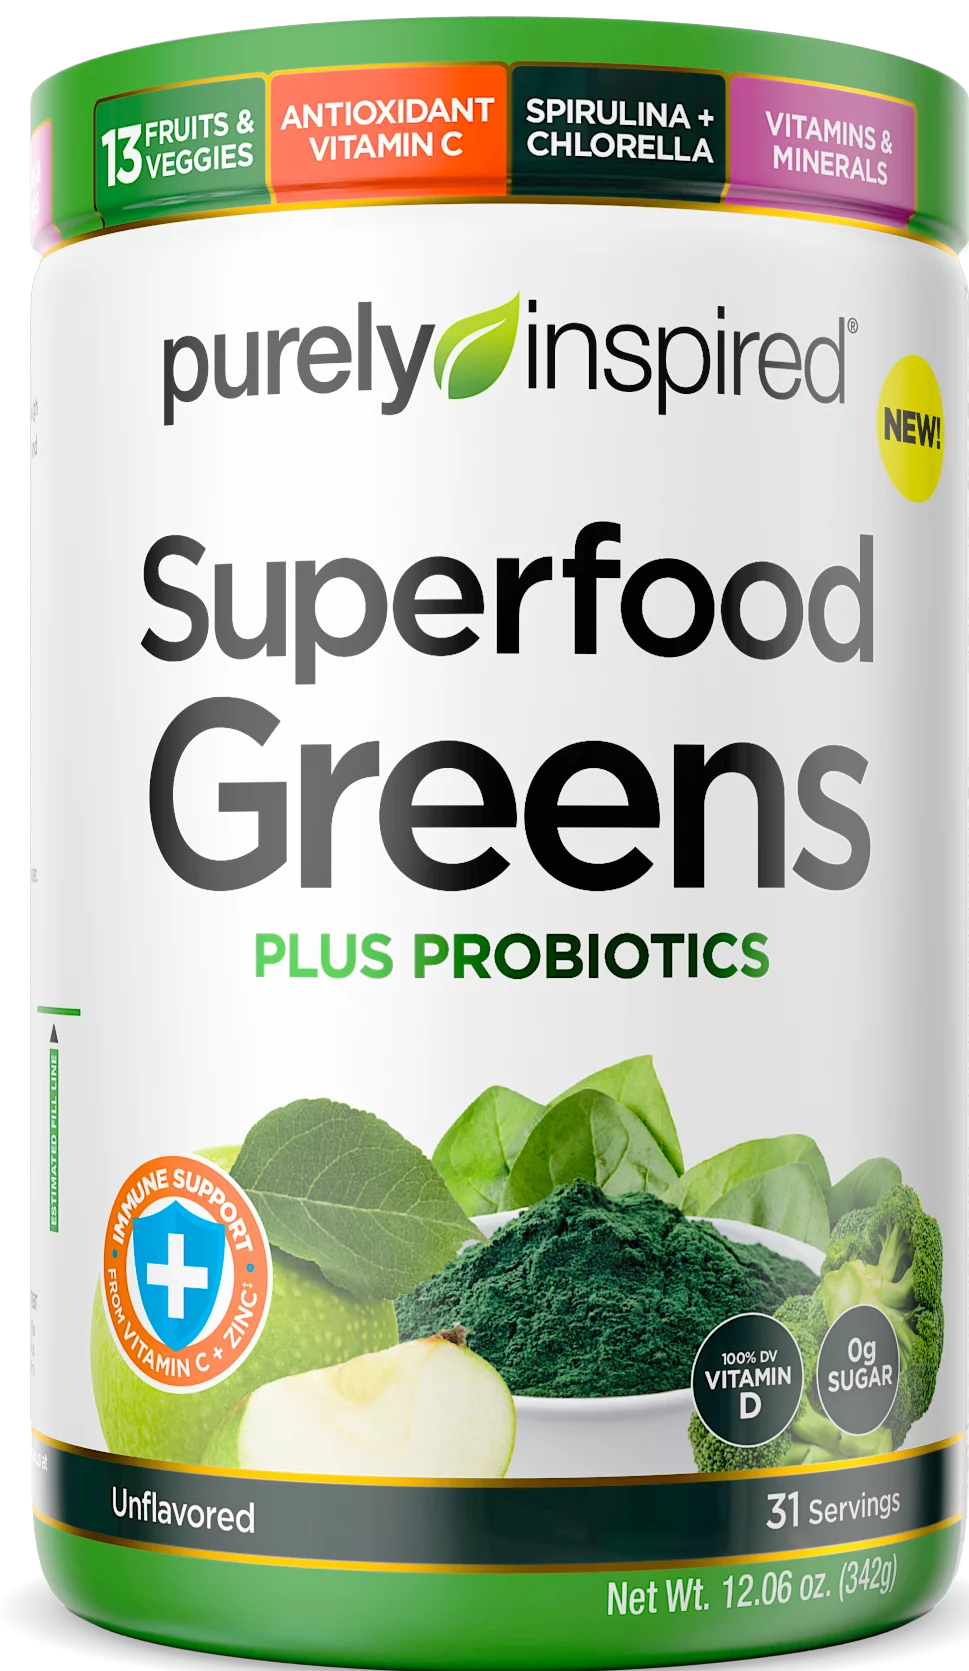 Purely Inspired Superfood Greens + Probiotics, Immune Support Powder, Unflavored, 31 servings